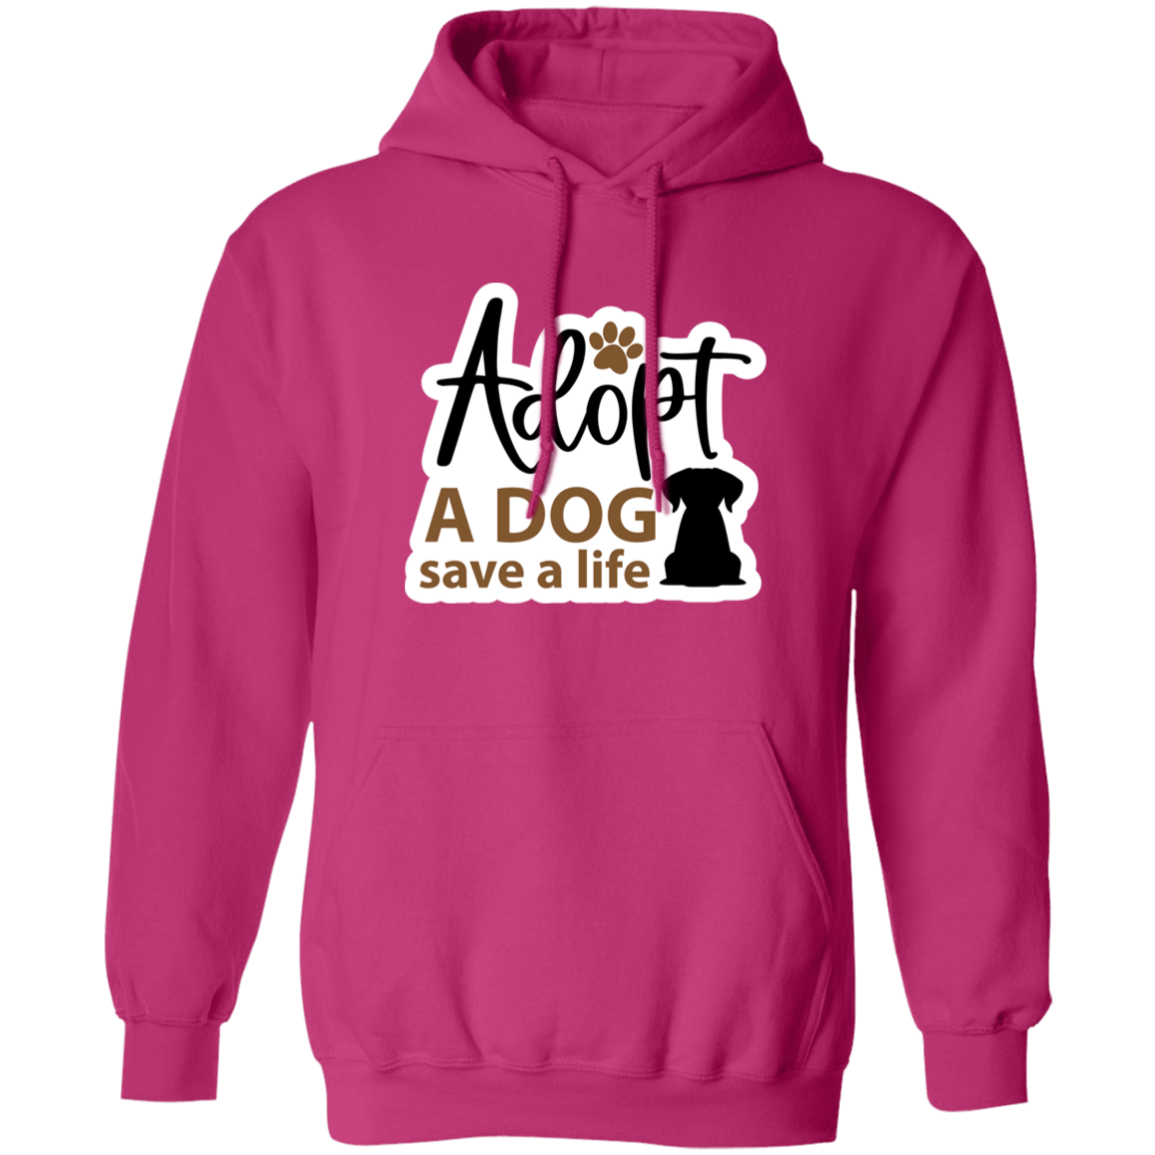 Adopt a Dog Save a Life Rescue Pullover Hoodie Hooded Sweatshirt